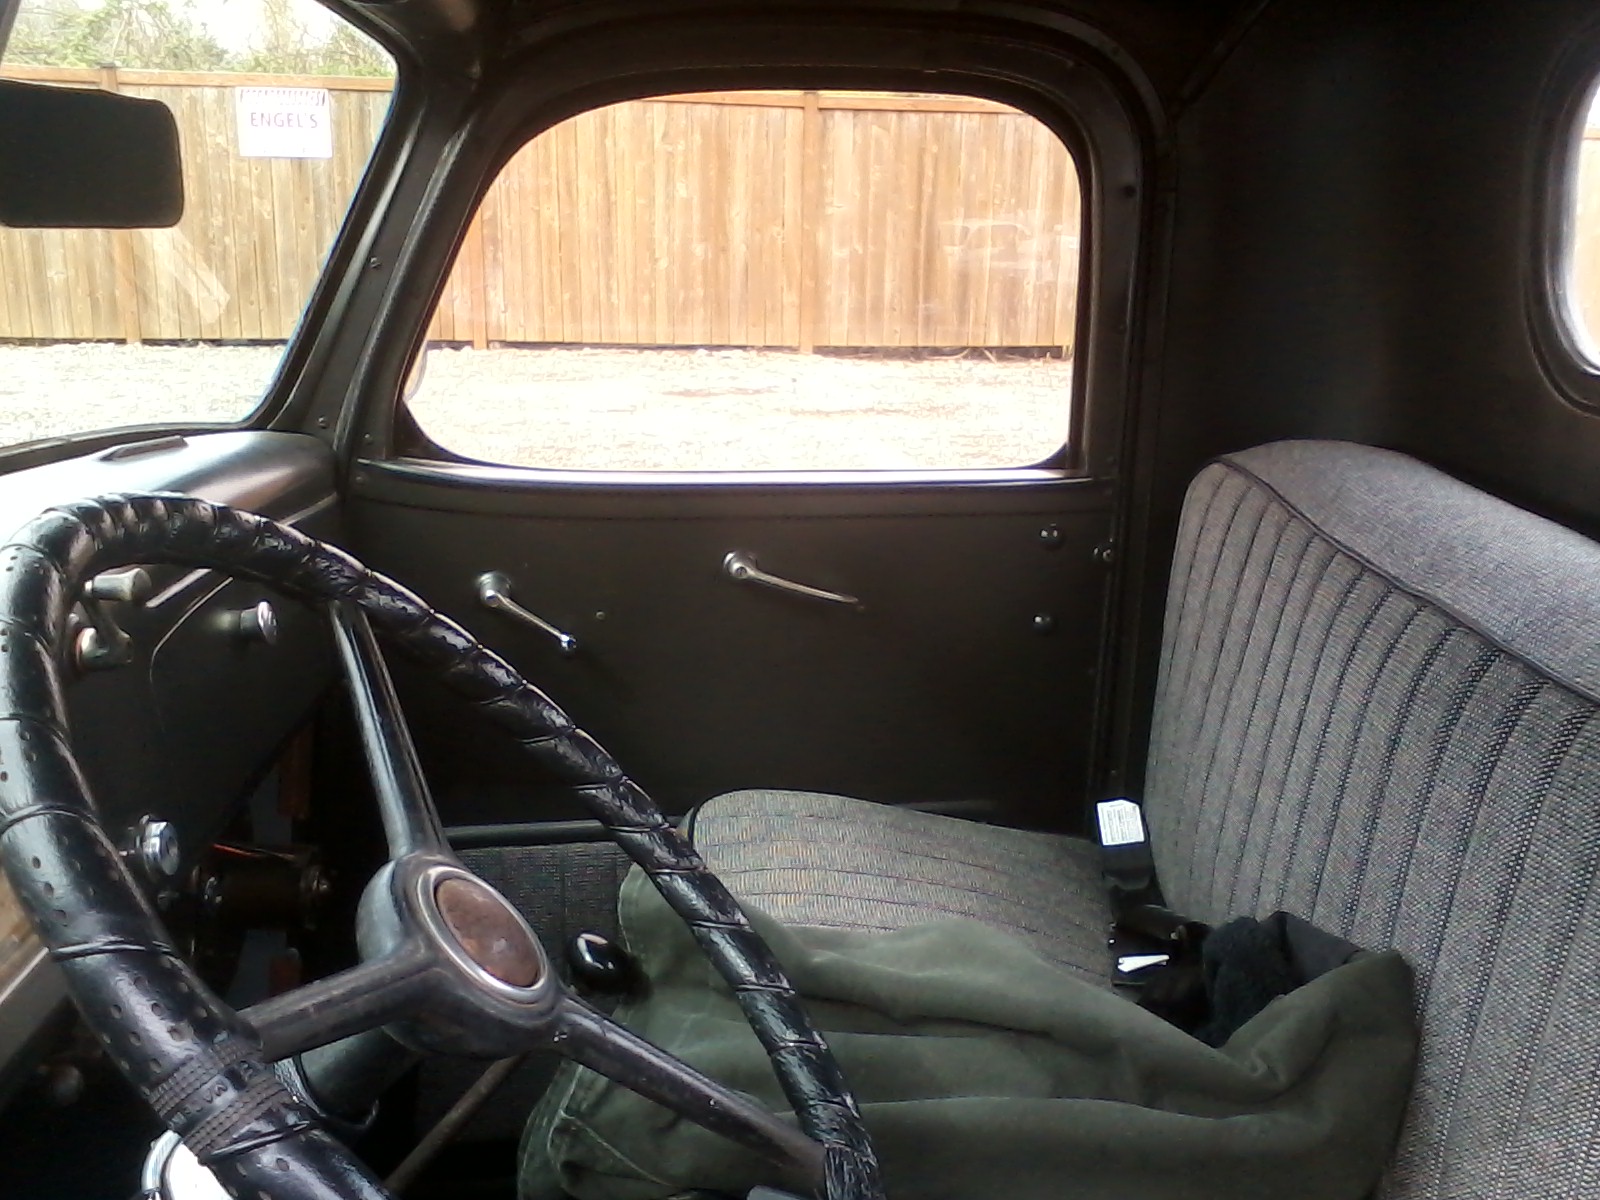 interior of the picture of the older blue truck